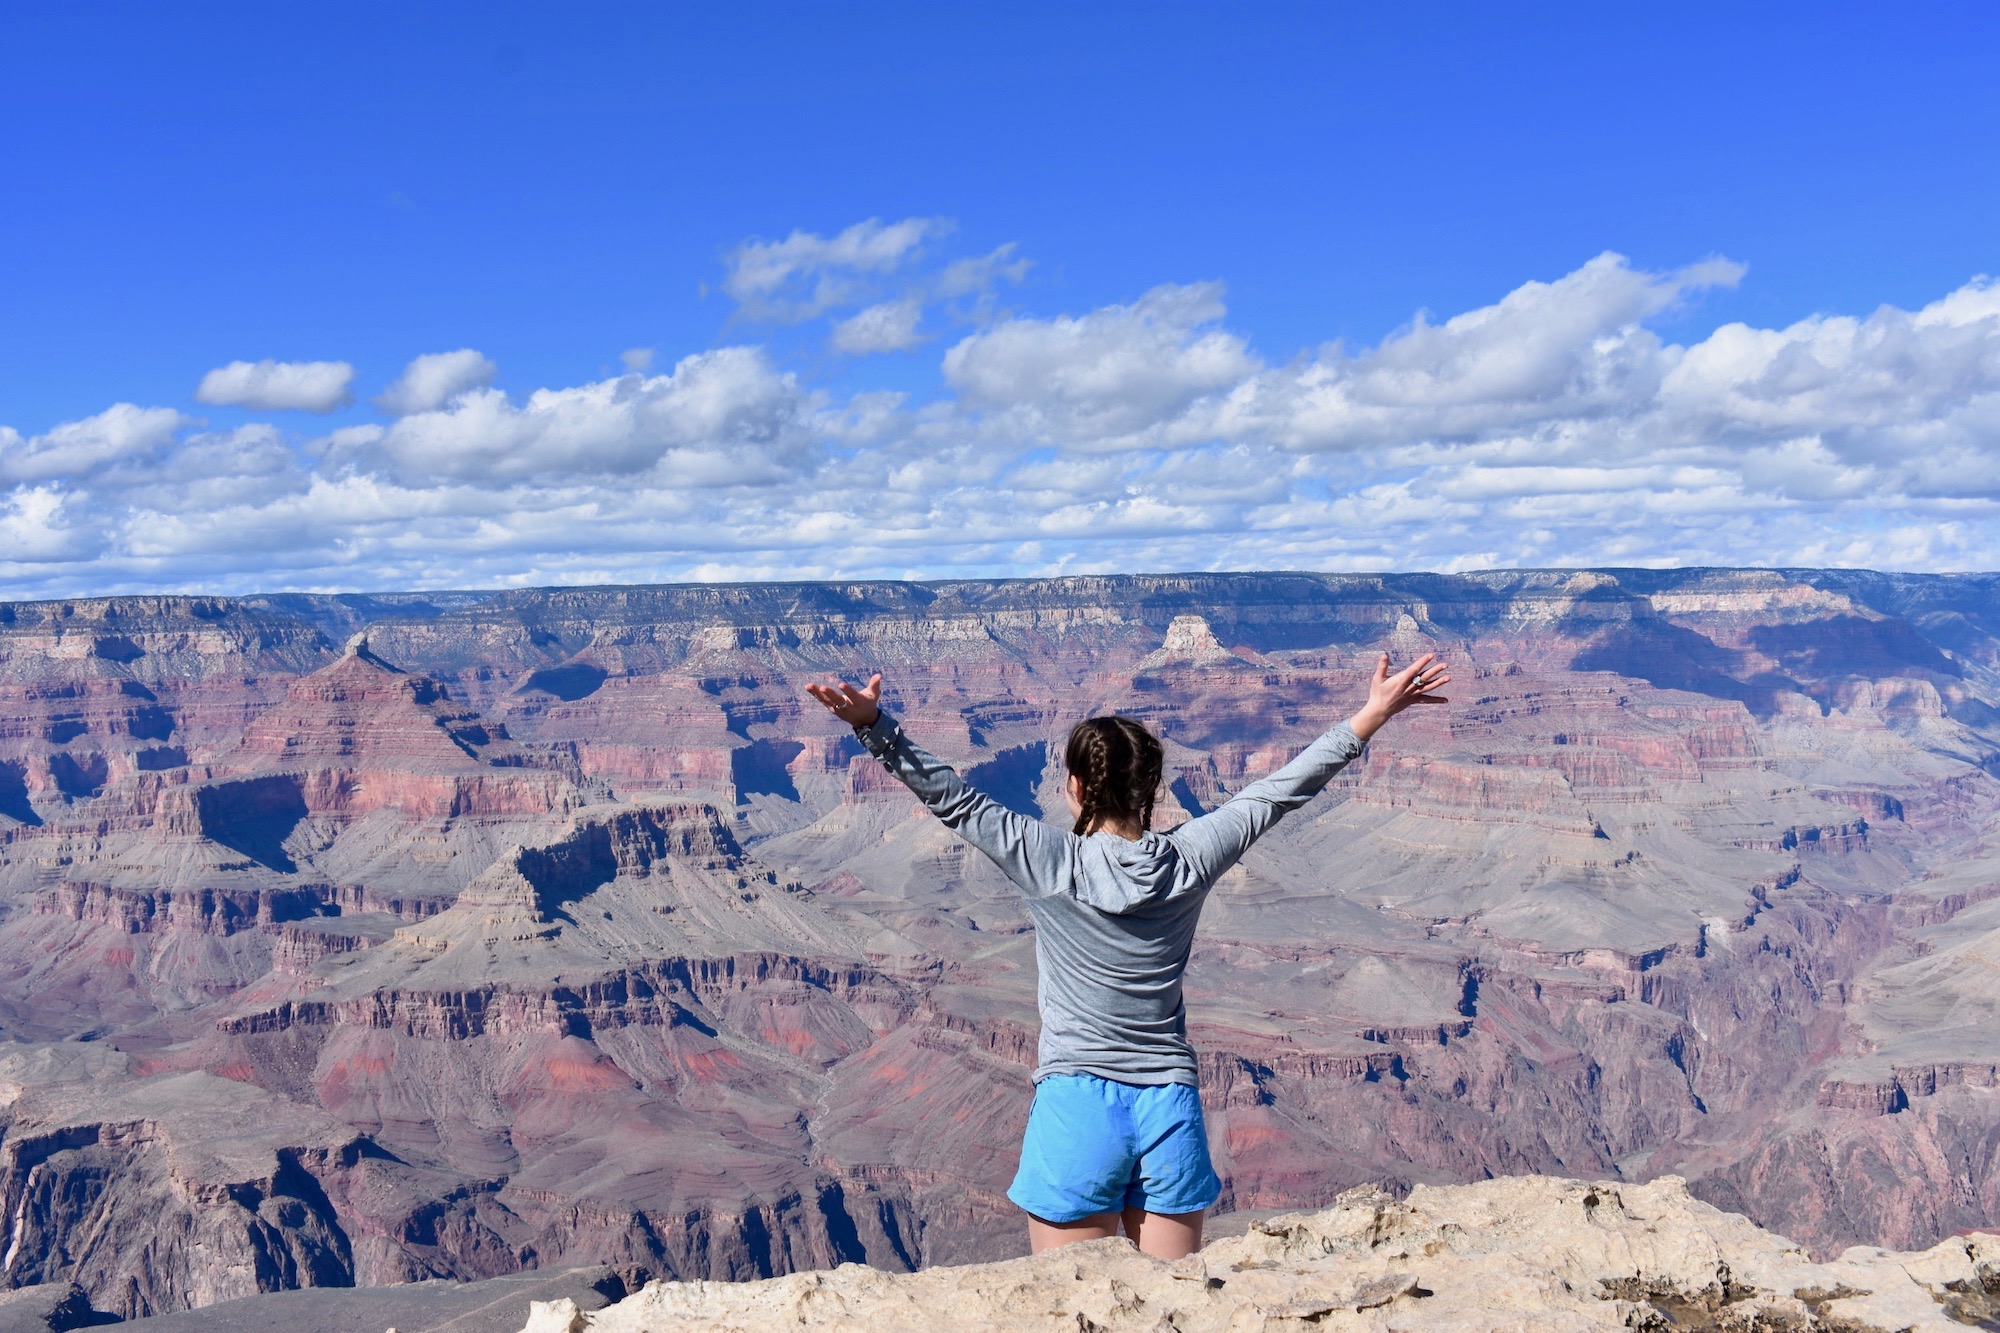 Eight Austin Peay-based students traveled west with Govs Outdoors during Spring Break, taking in sights such as the Grand Canyon, Petrified Forest National Park, the Devil’s Bridge and Cathedral Rock trails in Arizona, the Santa Rosa Blue Hole in New Mexico and the Cadillac Ranch in Texas.